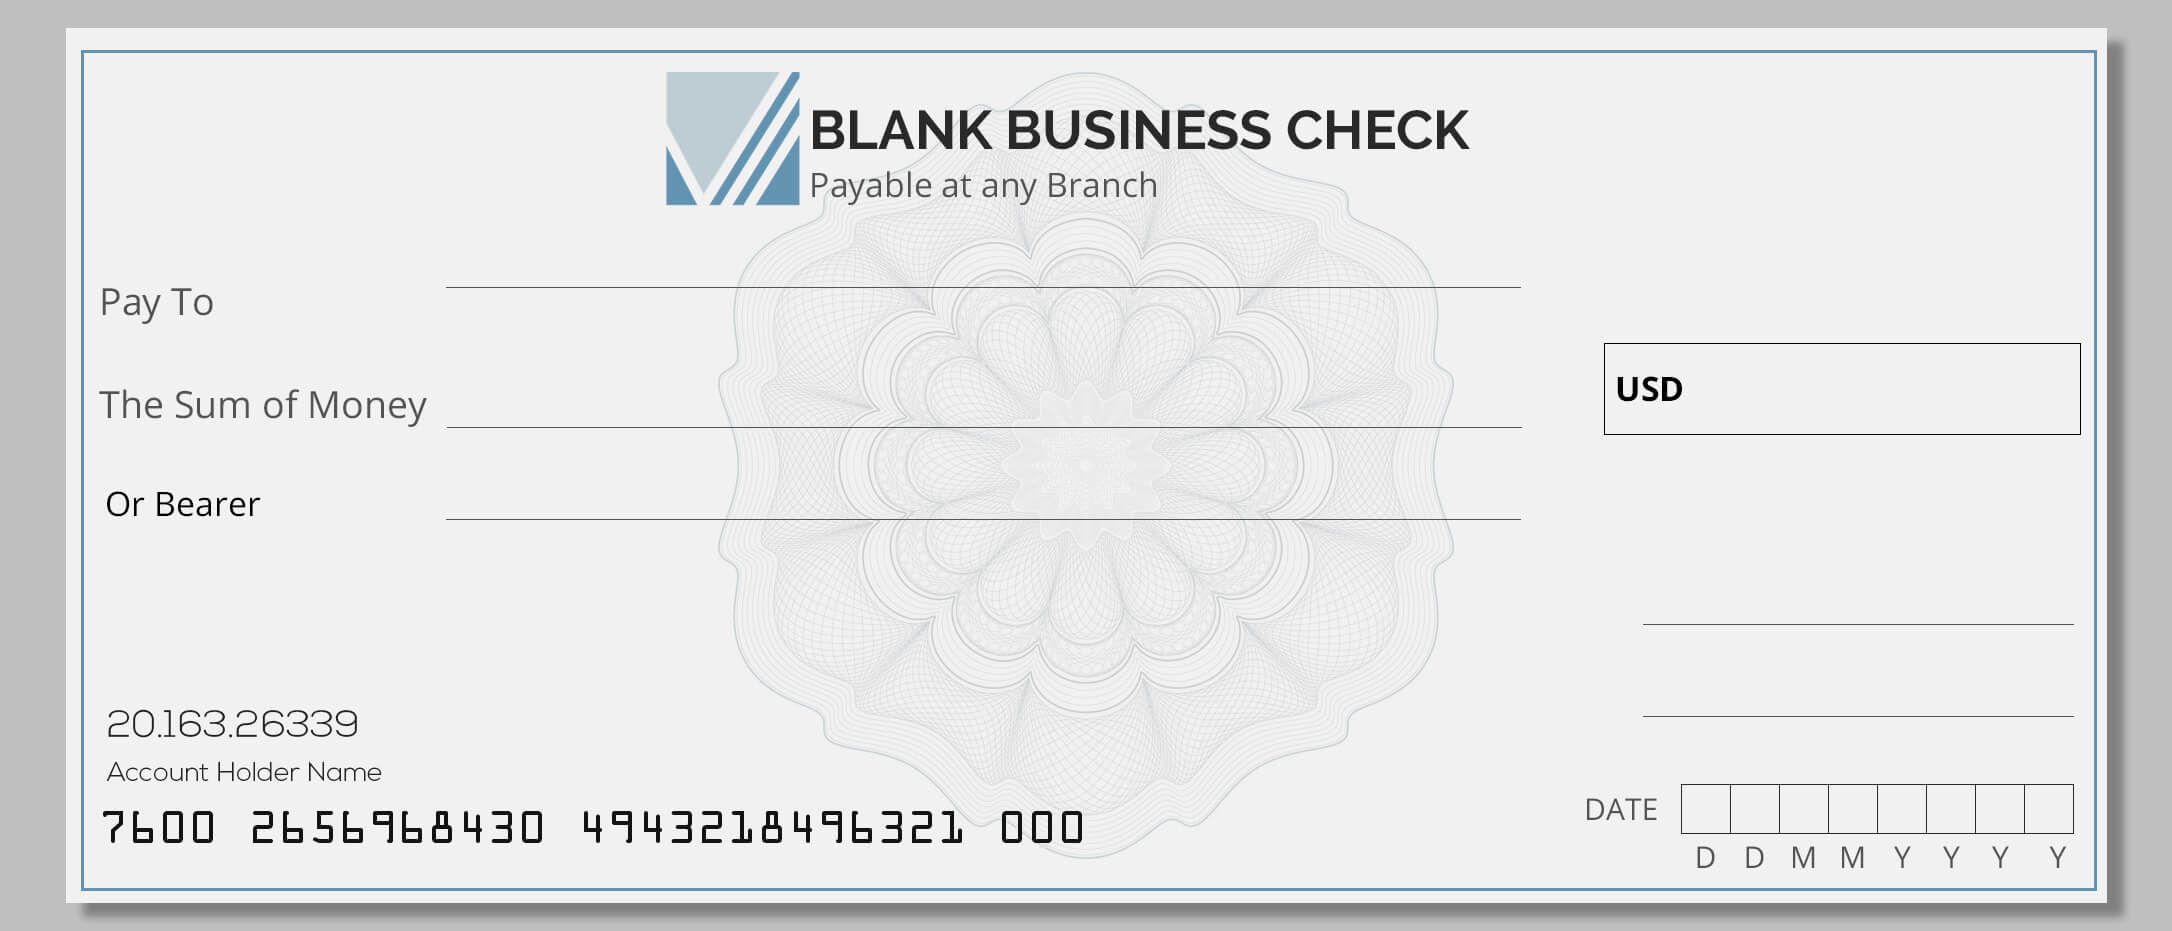 10+ Printable Blank Business Check in psd photoshop | room surf.com